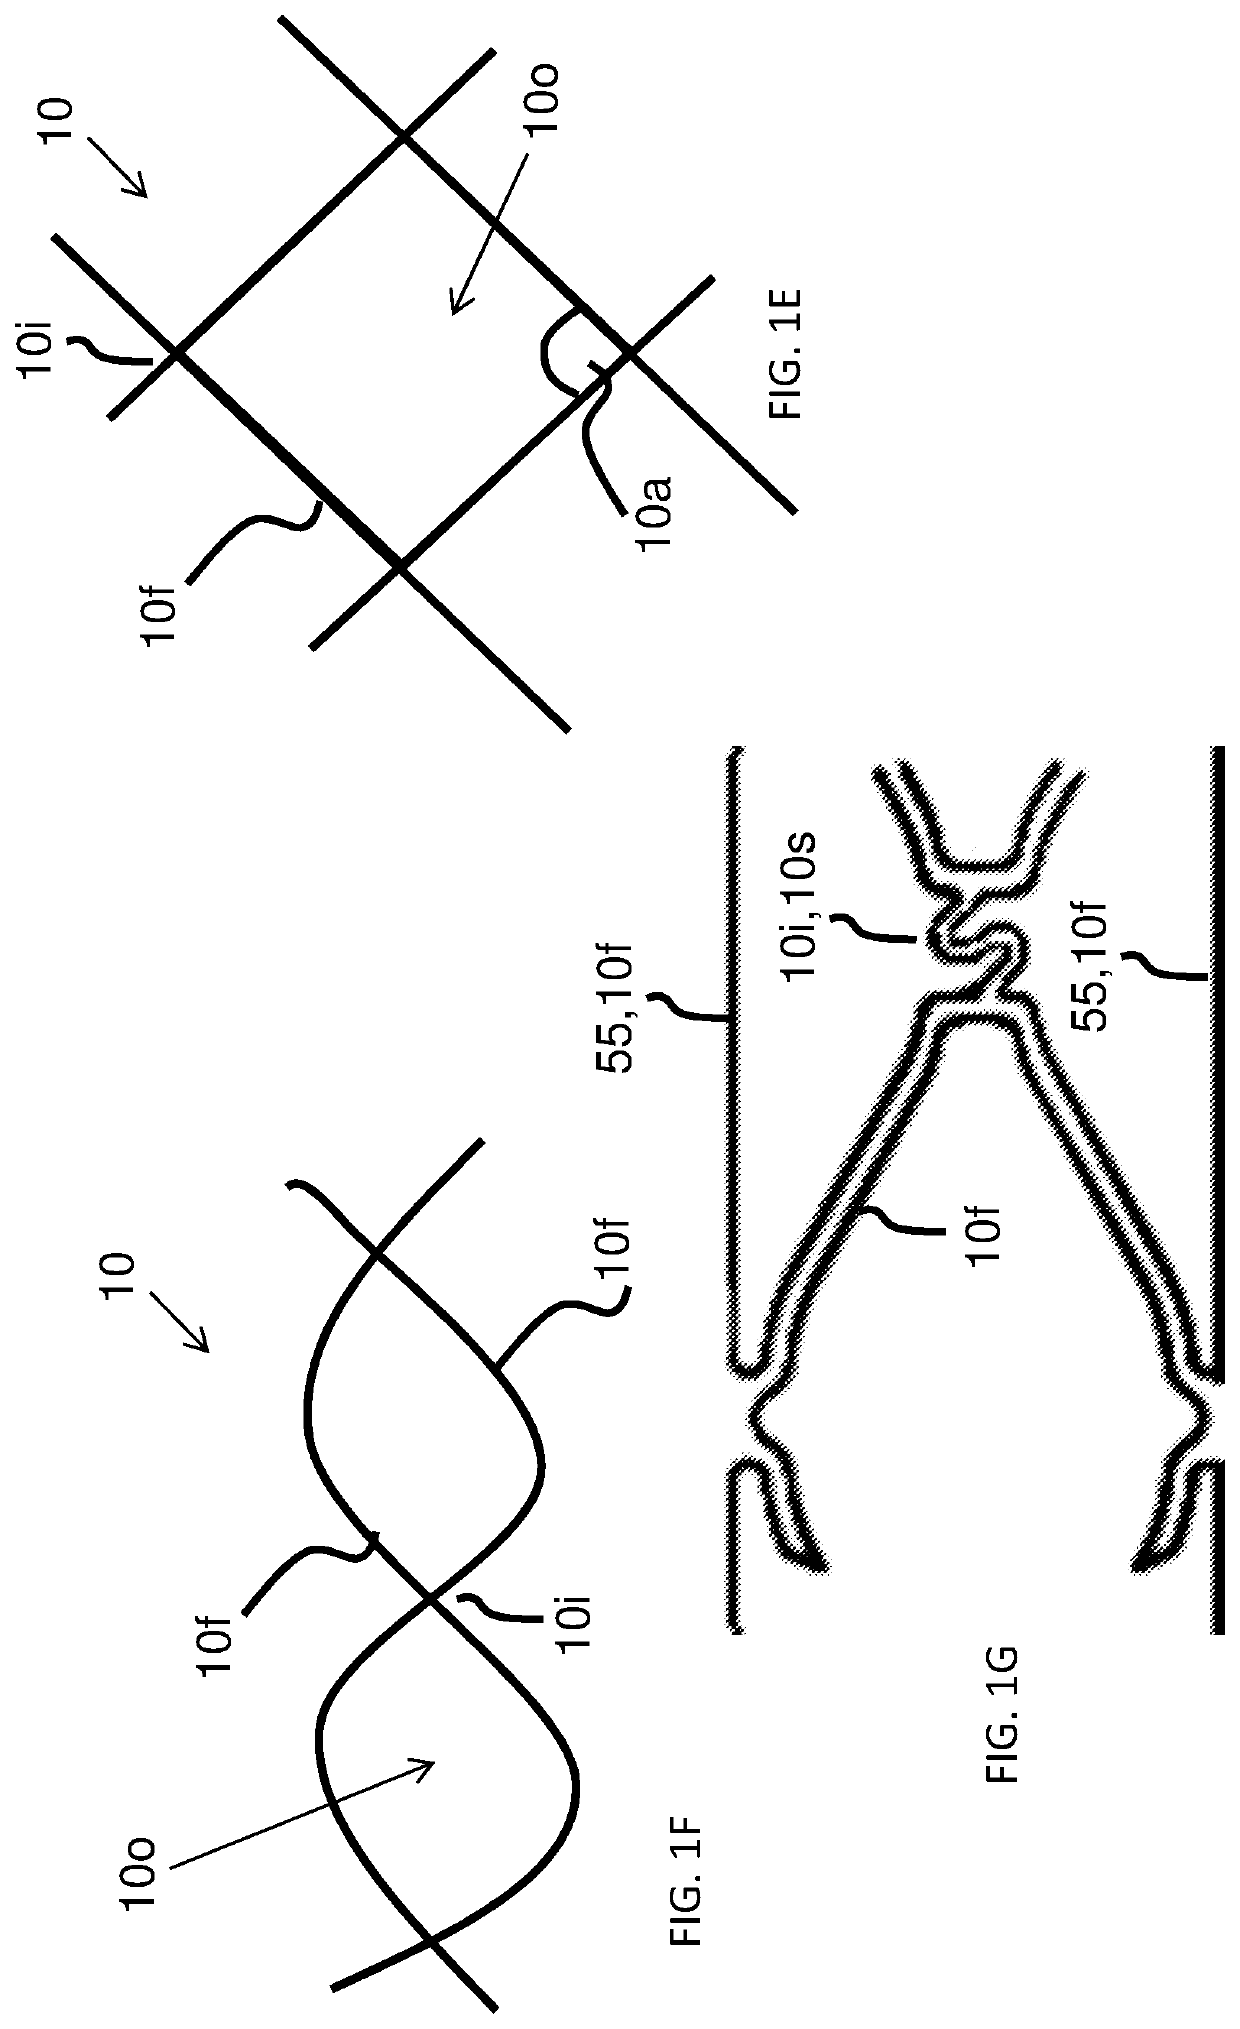 Intraluminal support structure and prosthetic valve from the same